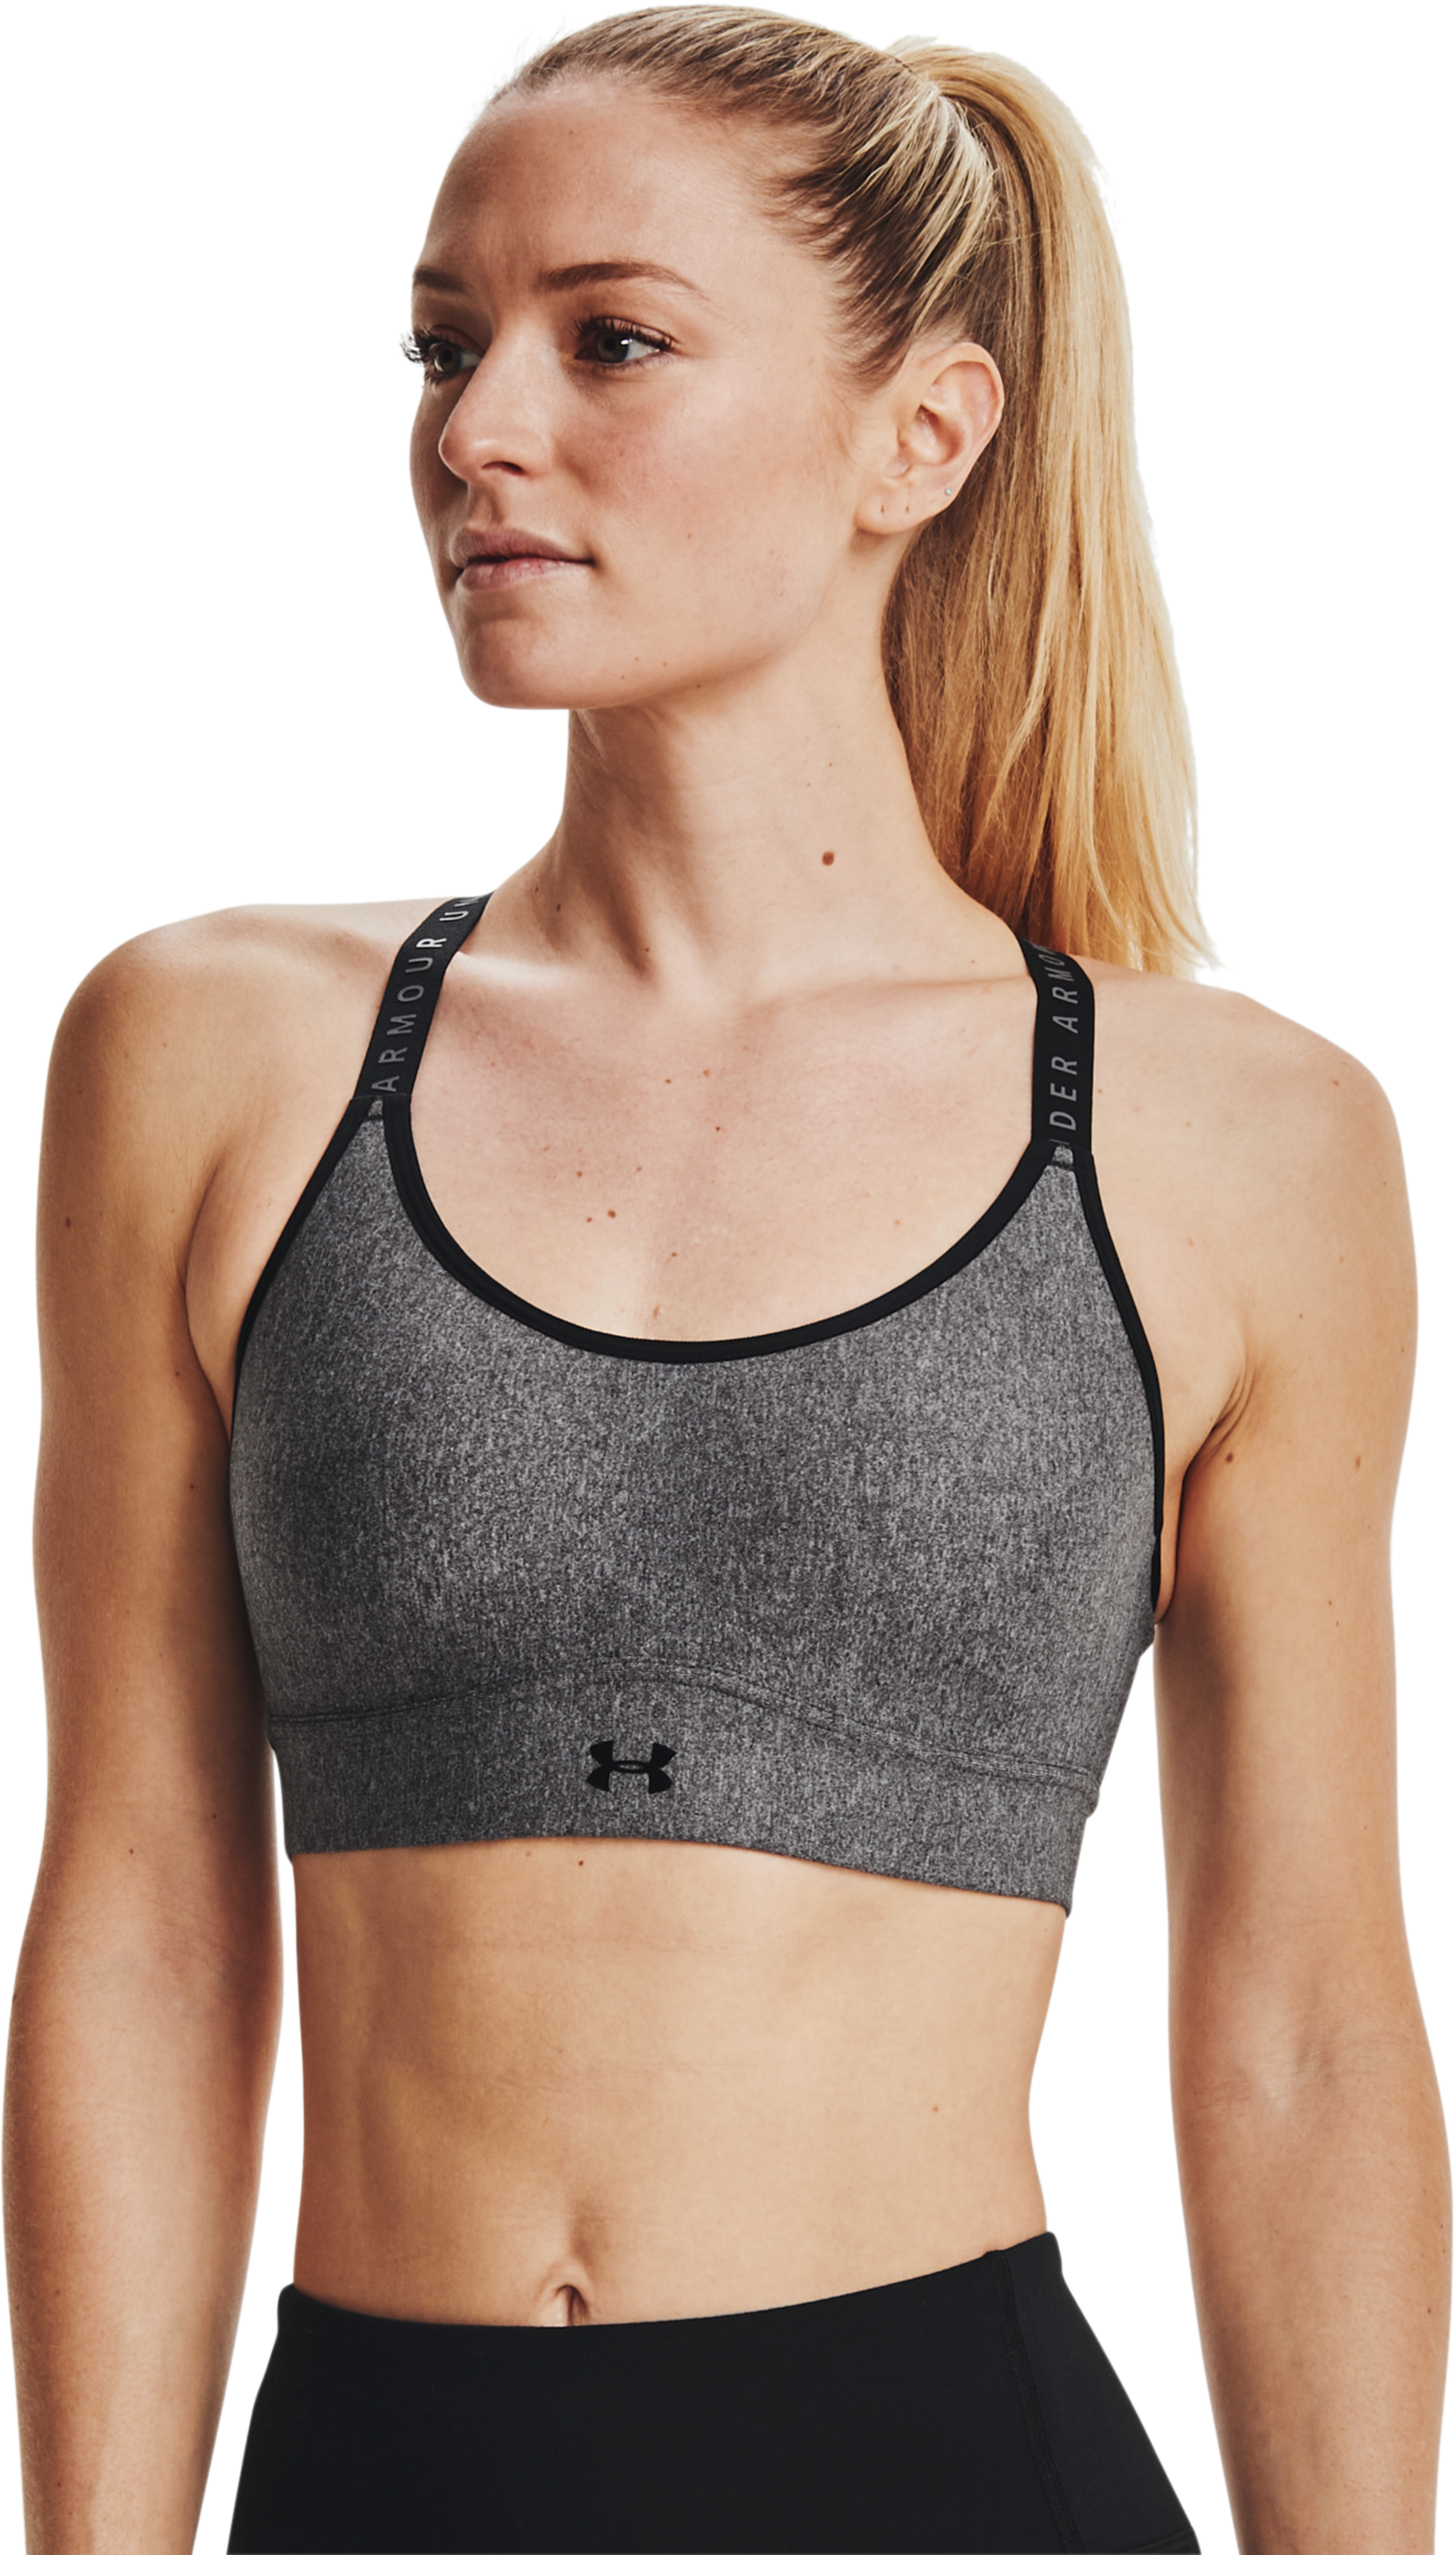 Under Armour Infinity Mid Sports Bra Black They threw out